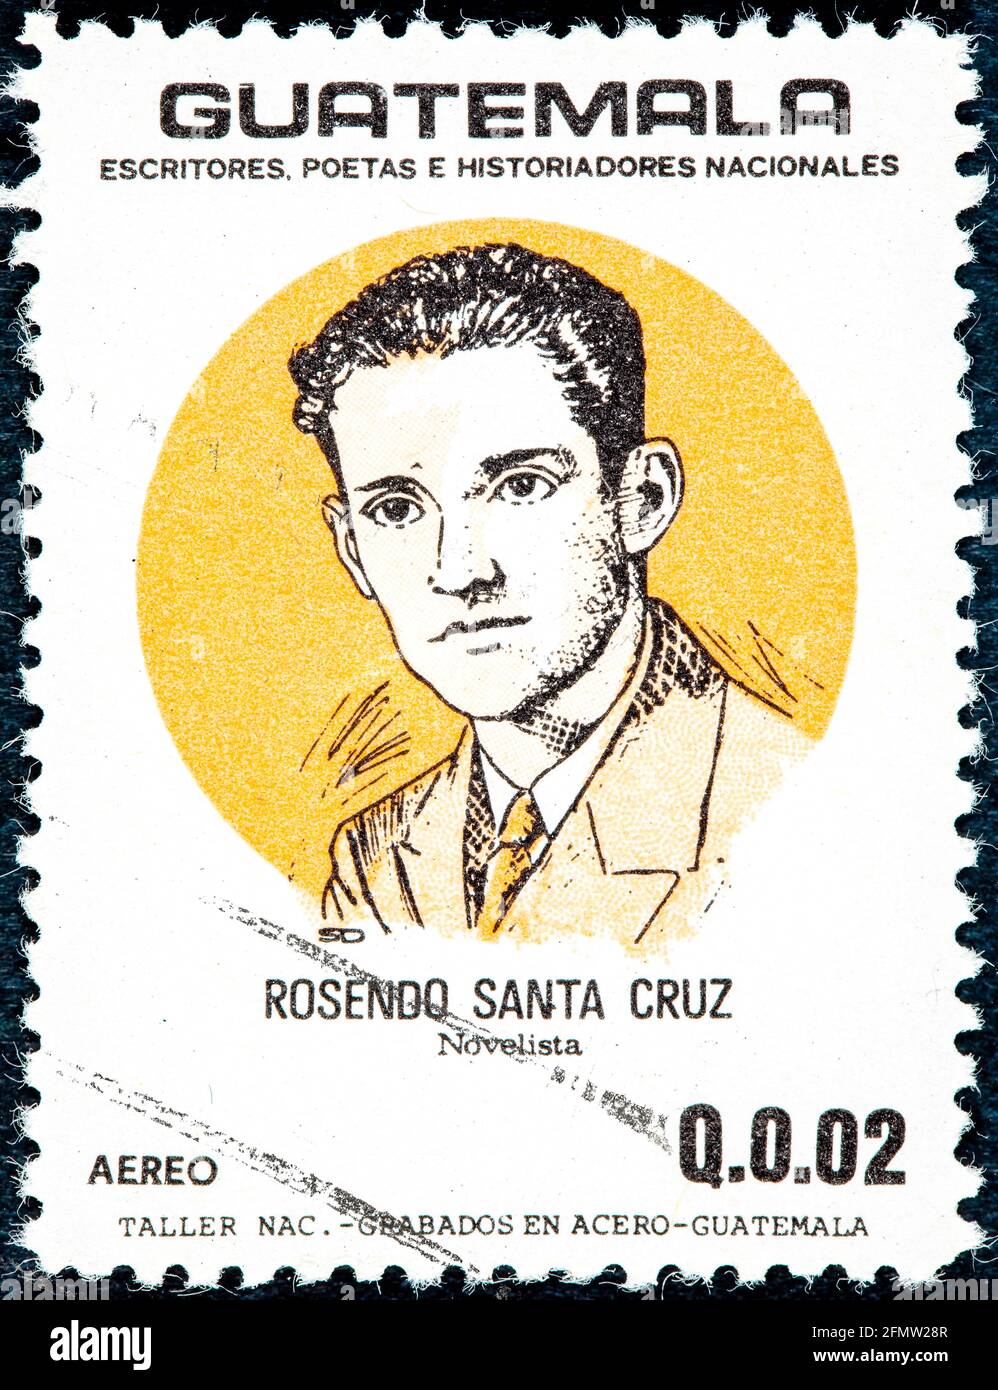 Guatemala - circa 1986: Postage stamp printed in Guatemala shows a Rosendo Santa Cruz, from the series of Guatemalan Writers, Poets and Historians, ci Stock Photo